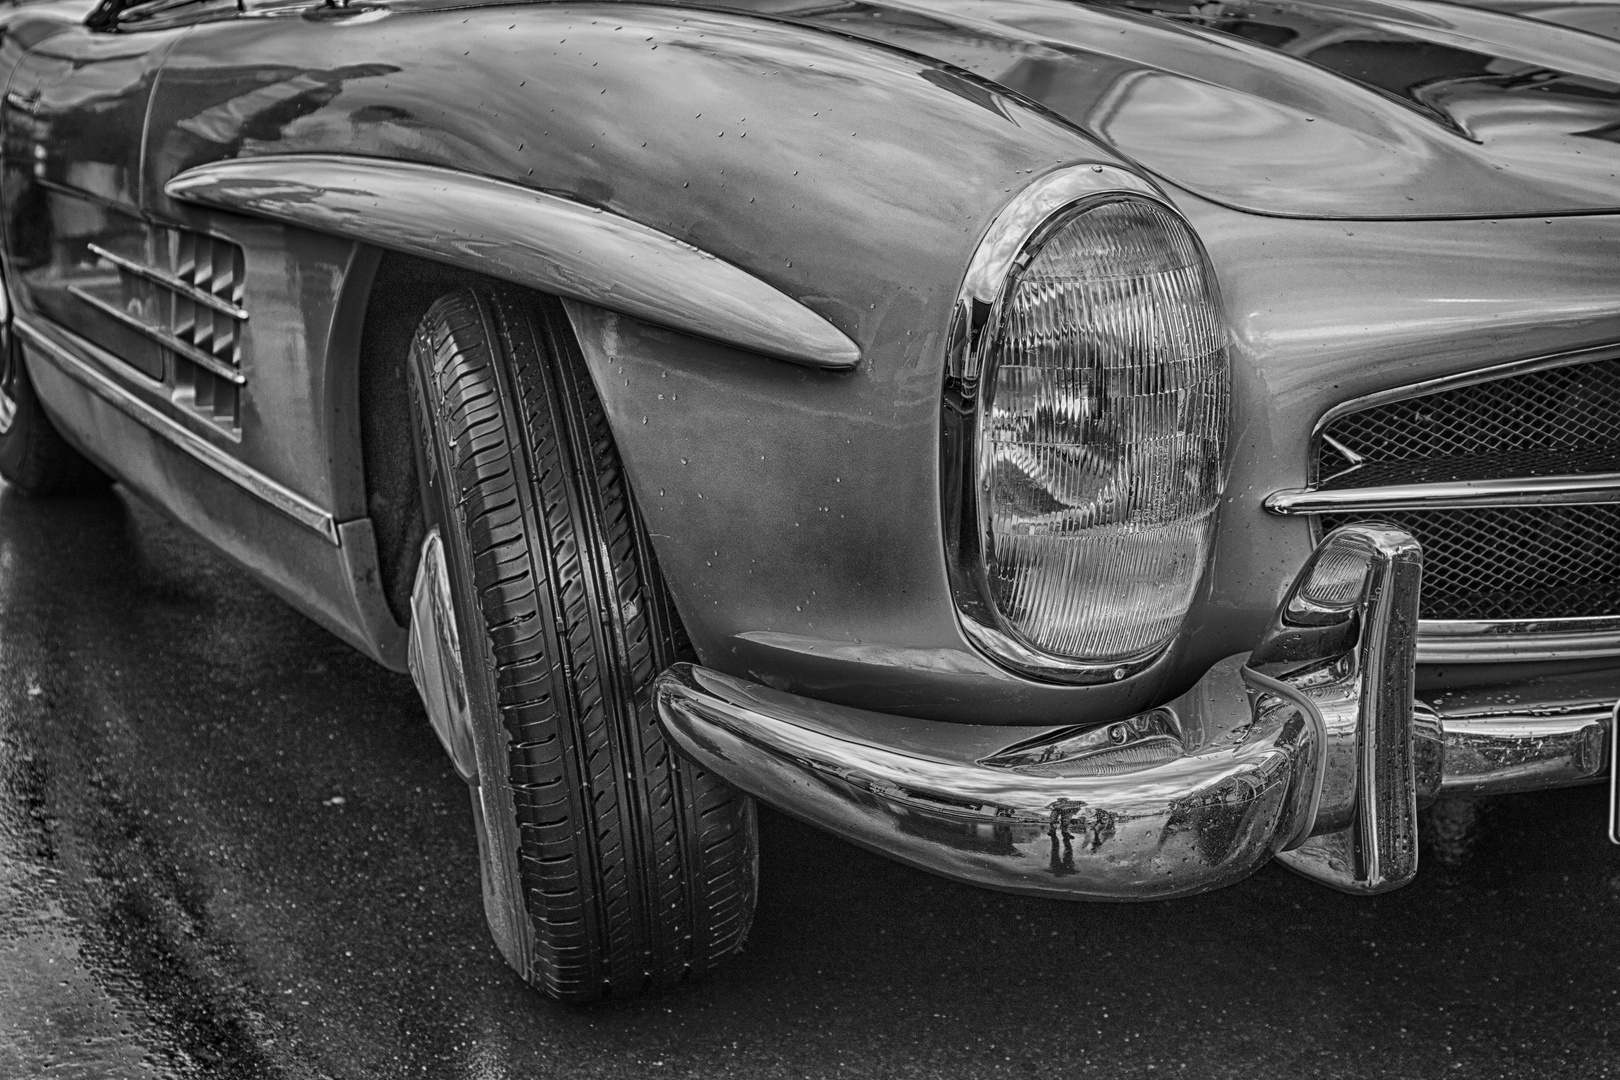 300 SL in HDR